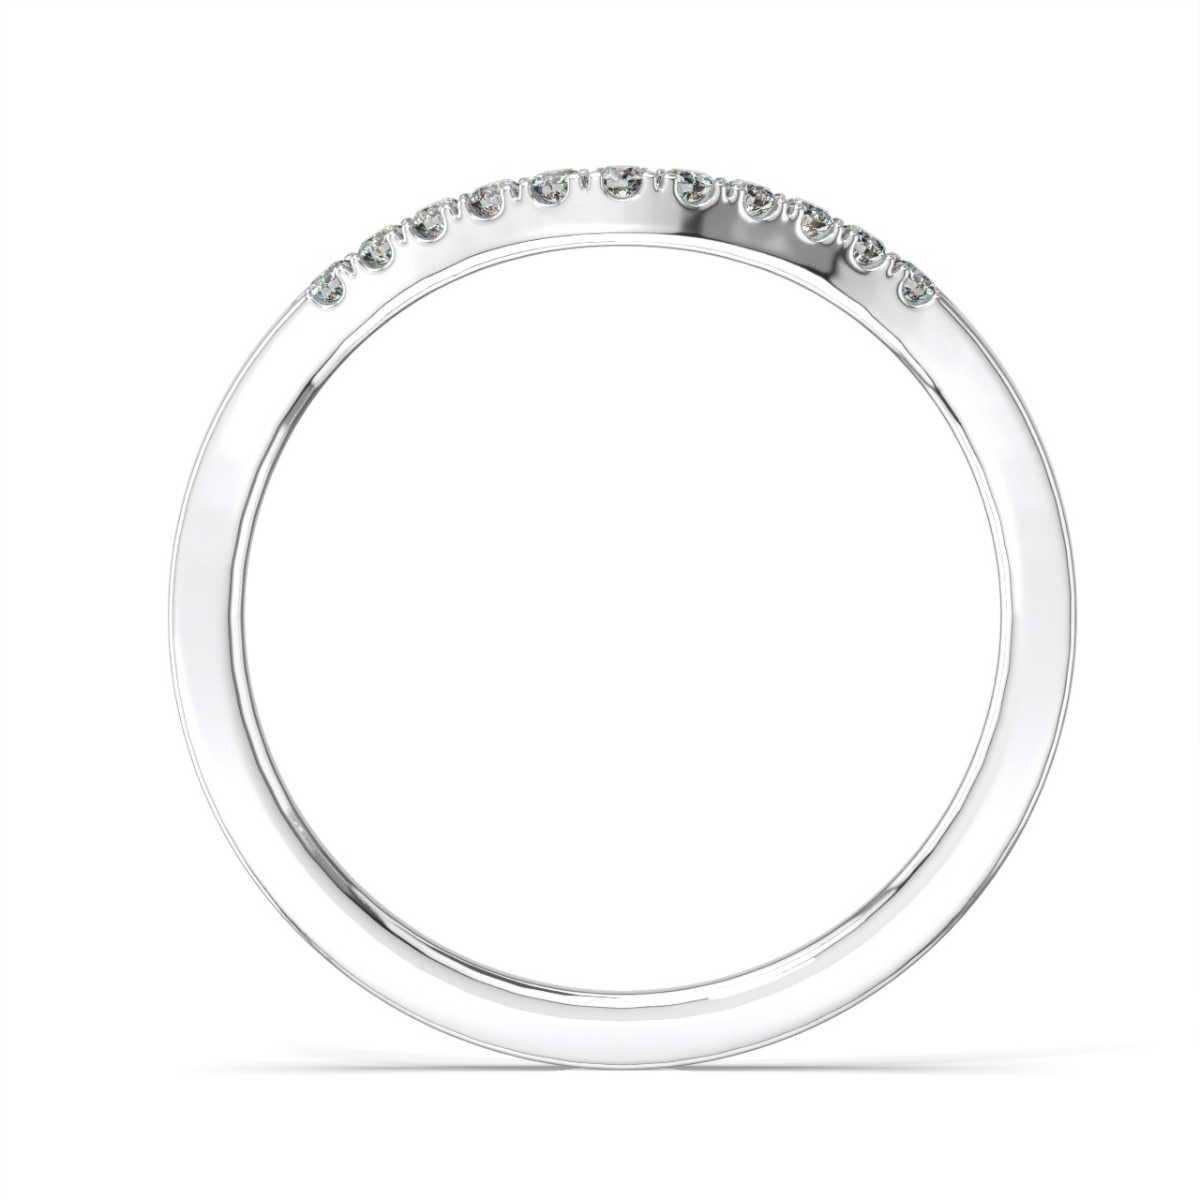 This petite curved band features Micro -Prongs set round brilliant diamonds to match your engagement ring.Experience the difference!

Product details: 

Center Gemstone Color: WHITE
Side Gemstone Type: NATURAL DIAMOND
Side Gemstone Shape: